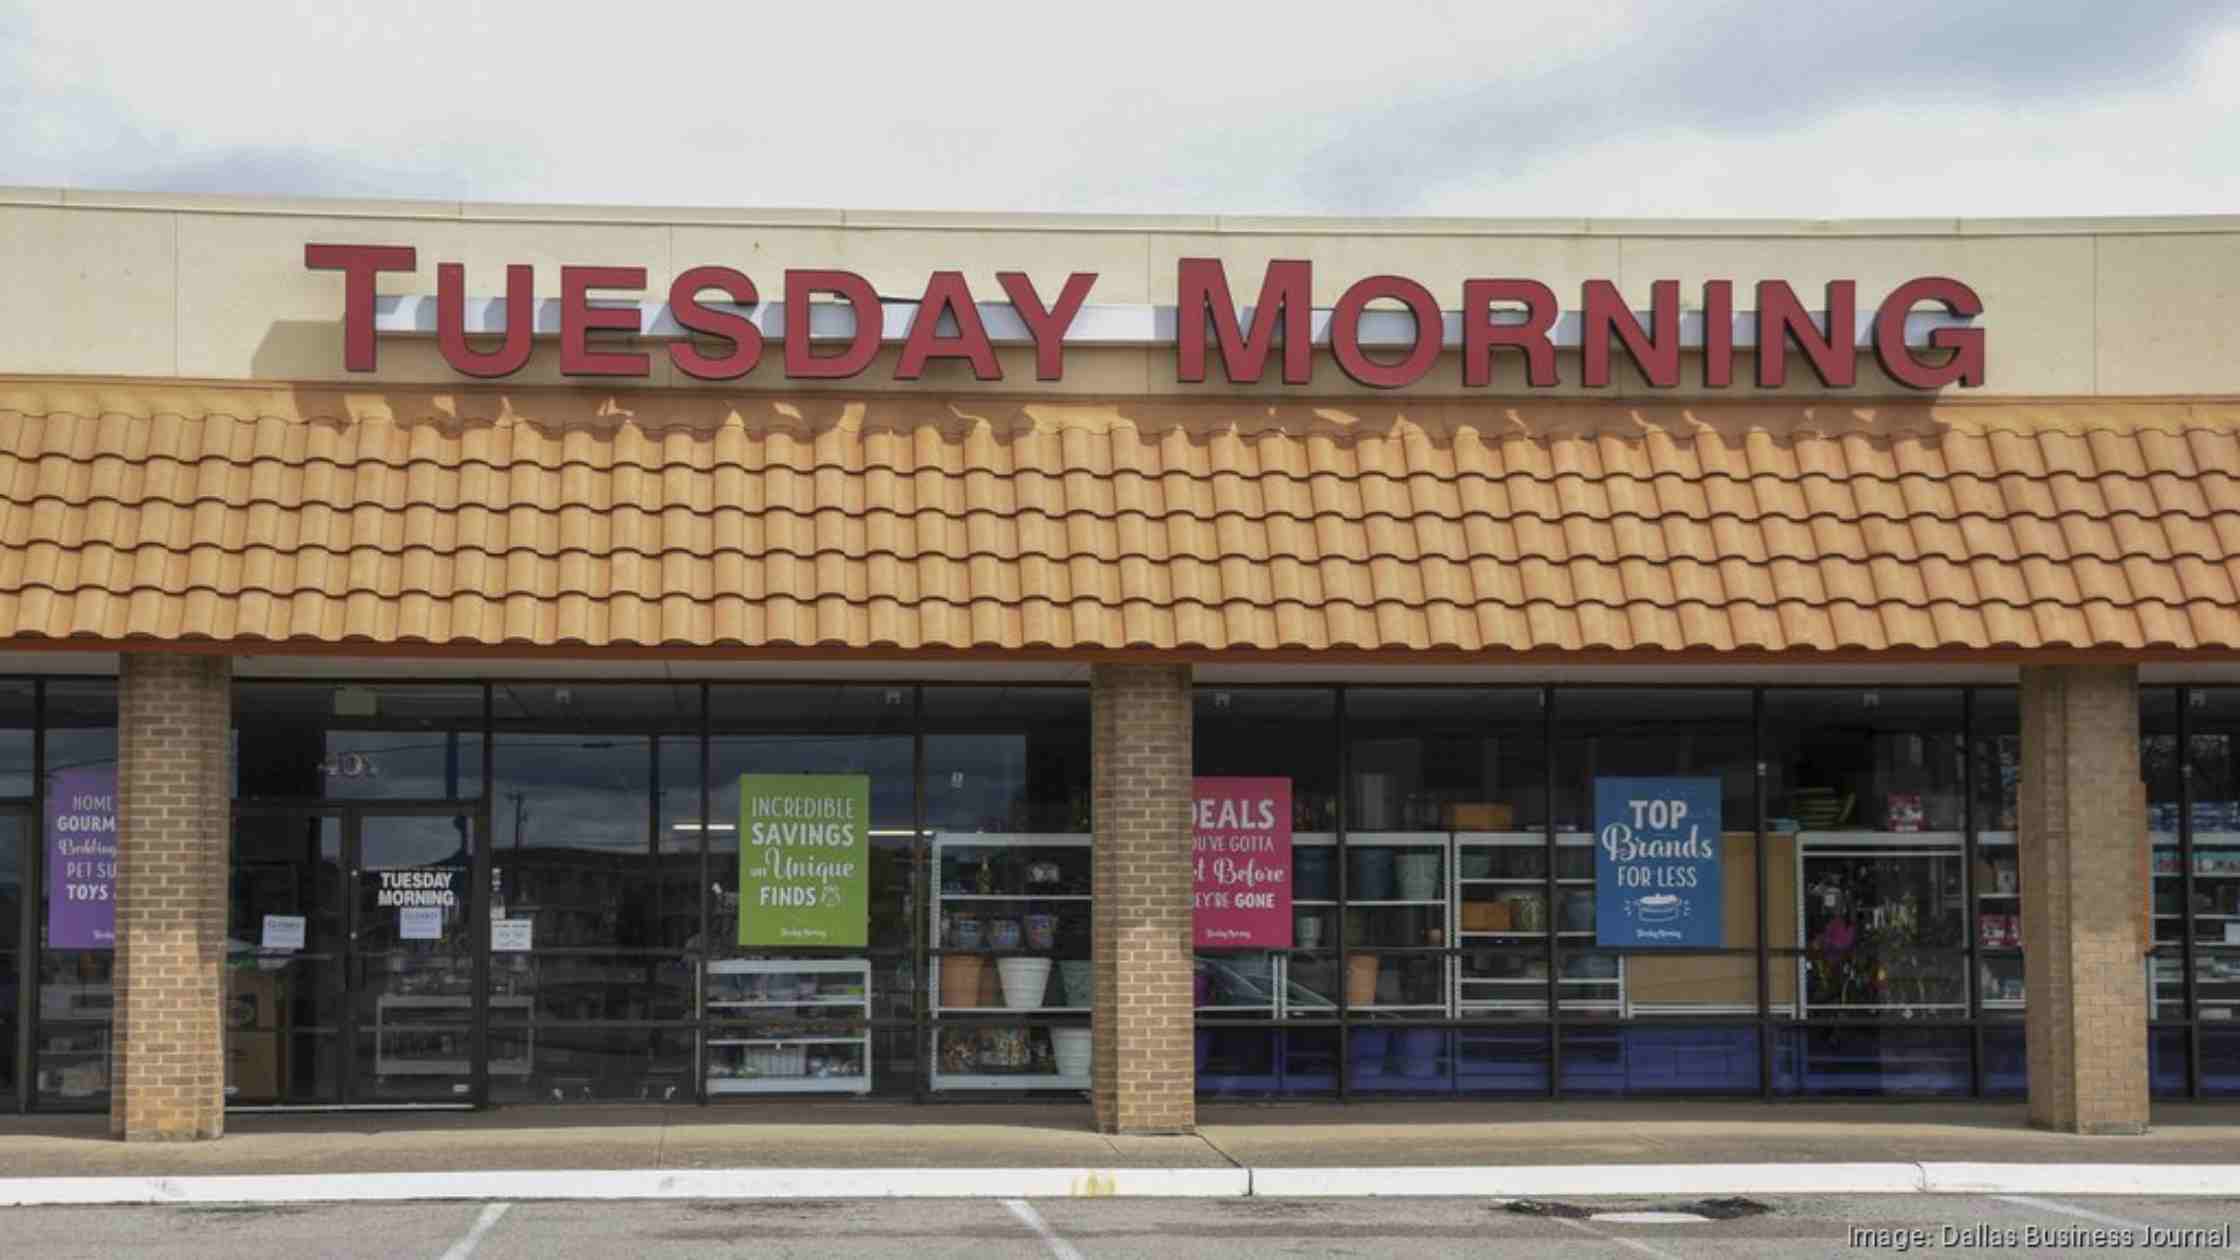 Is Tuesday Morning going out of business